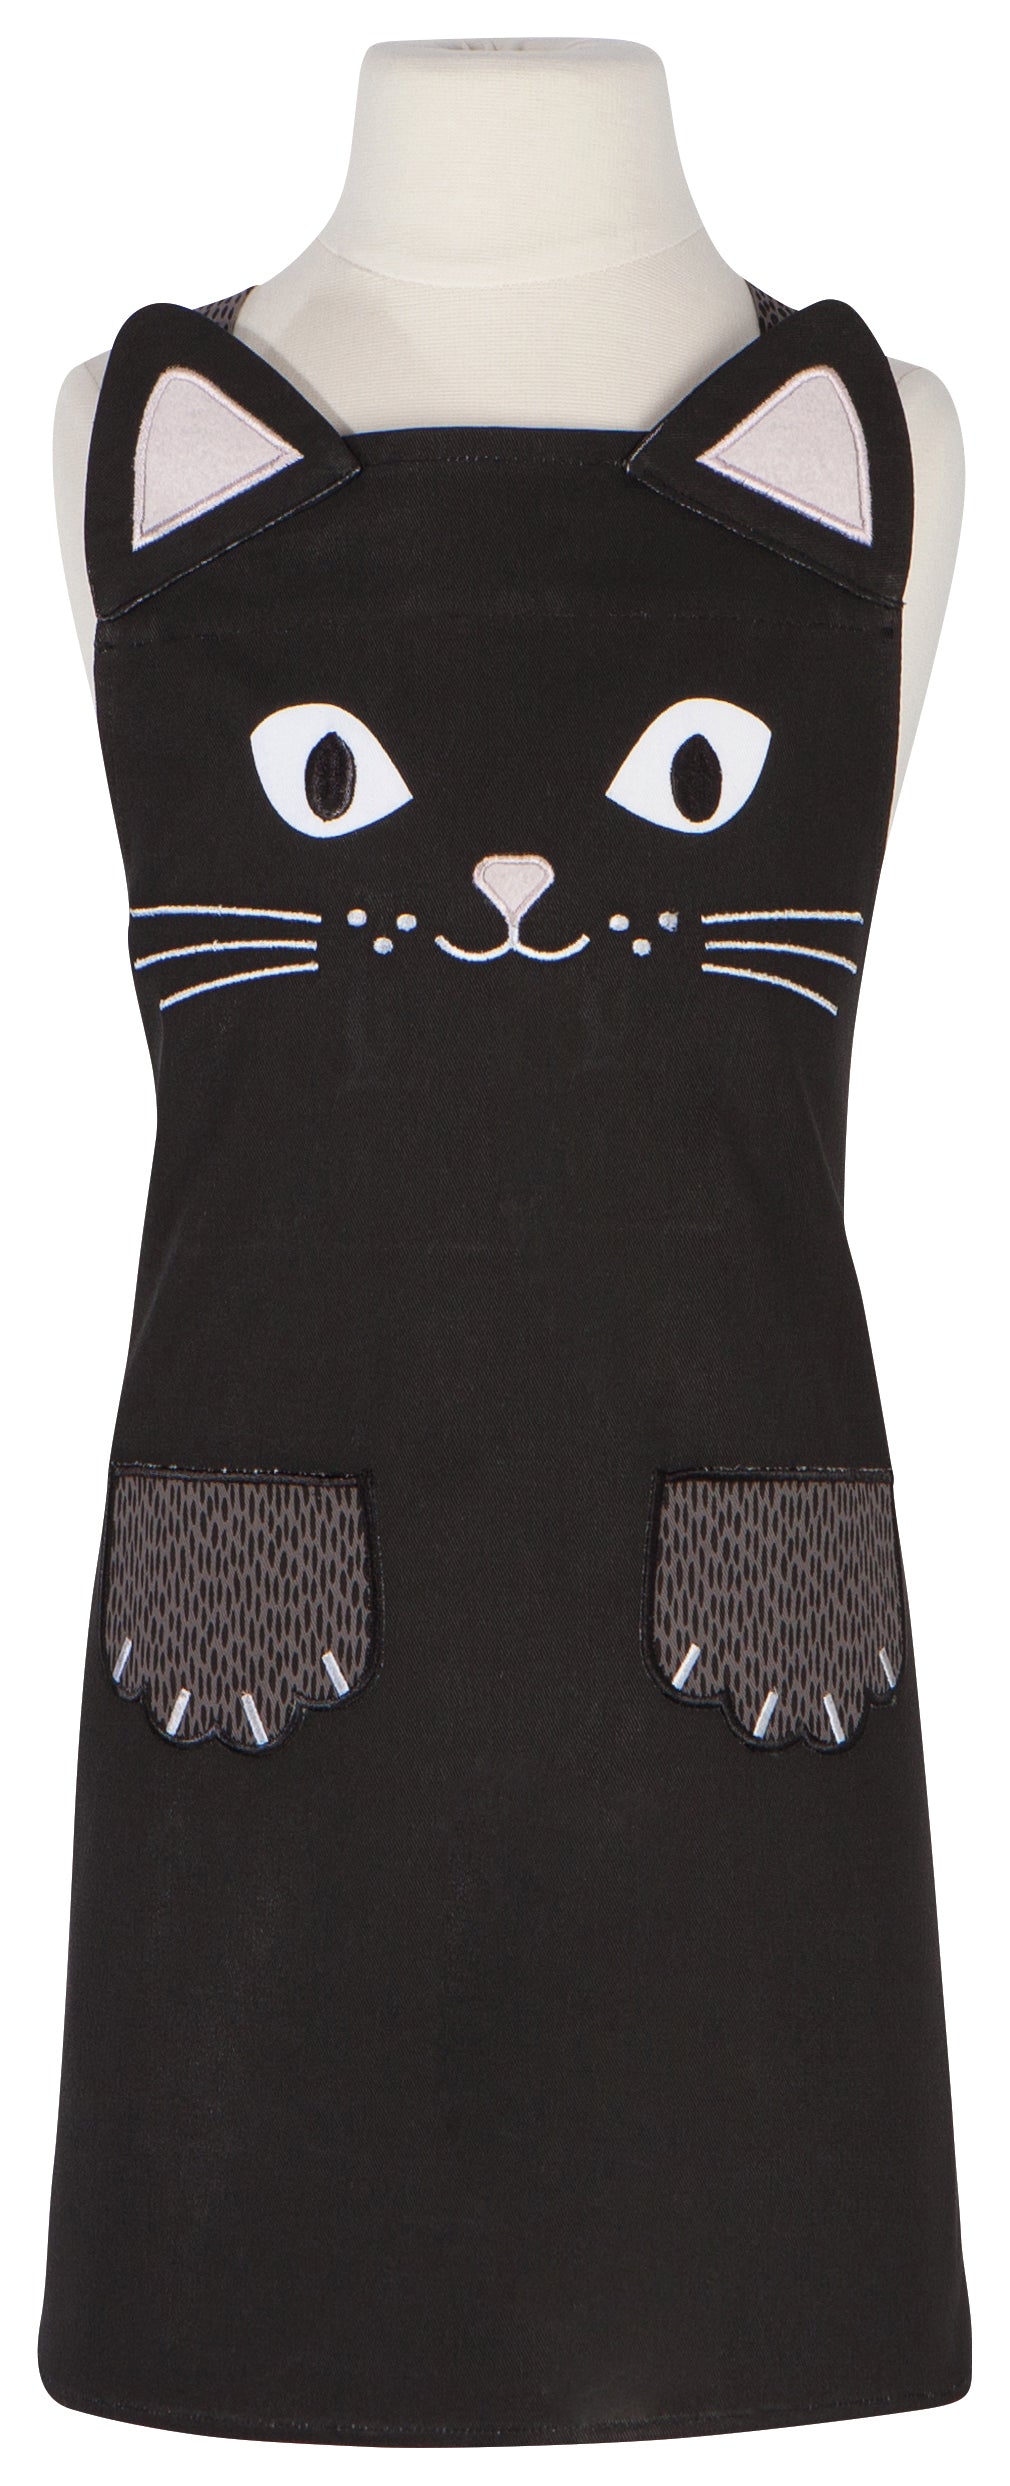 Cat Daydream Kids Apron and Hat Set